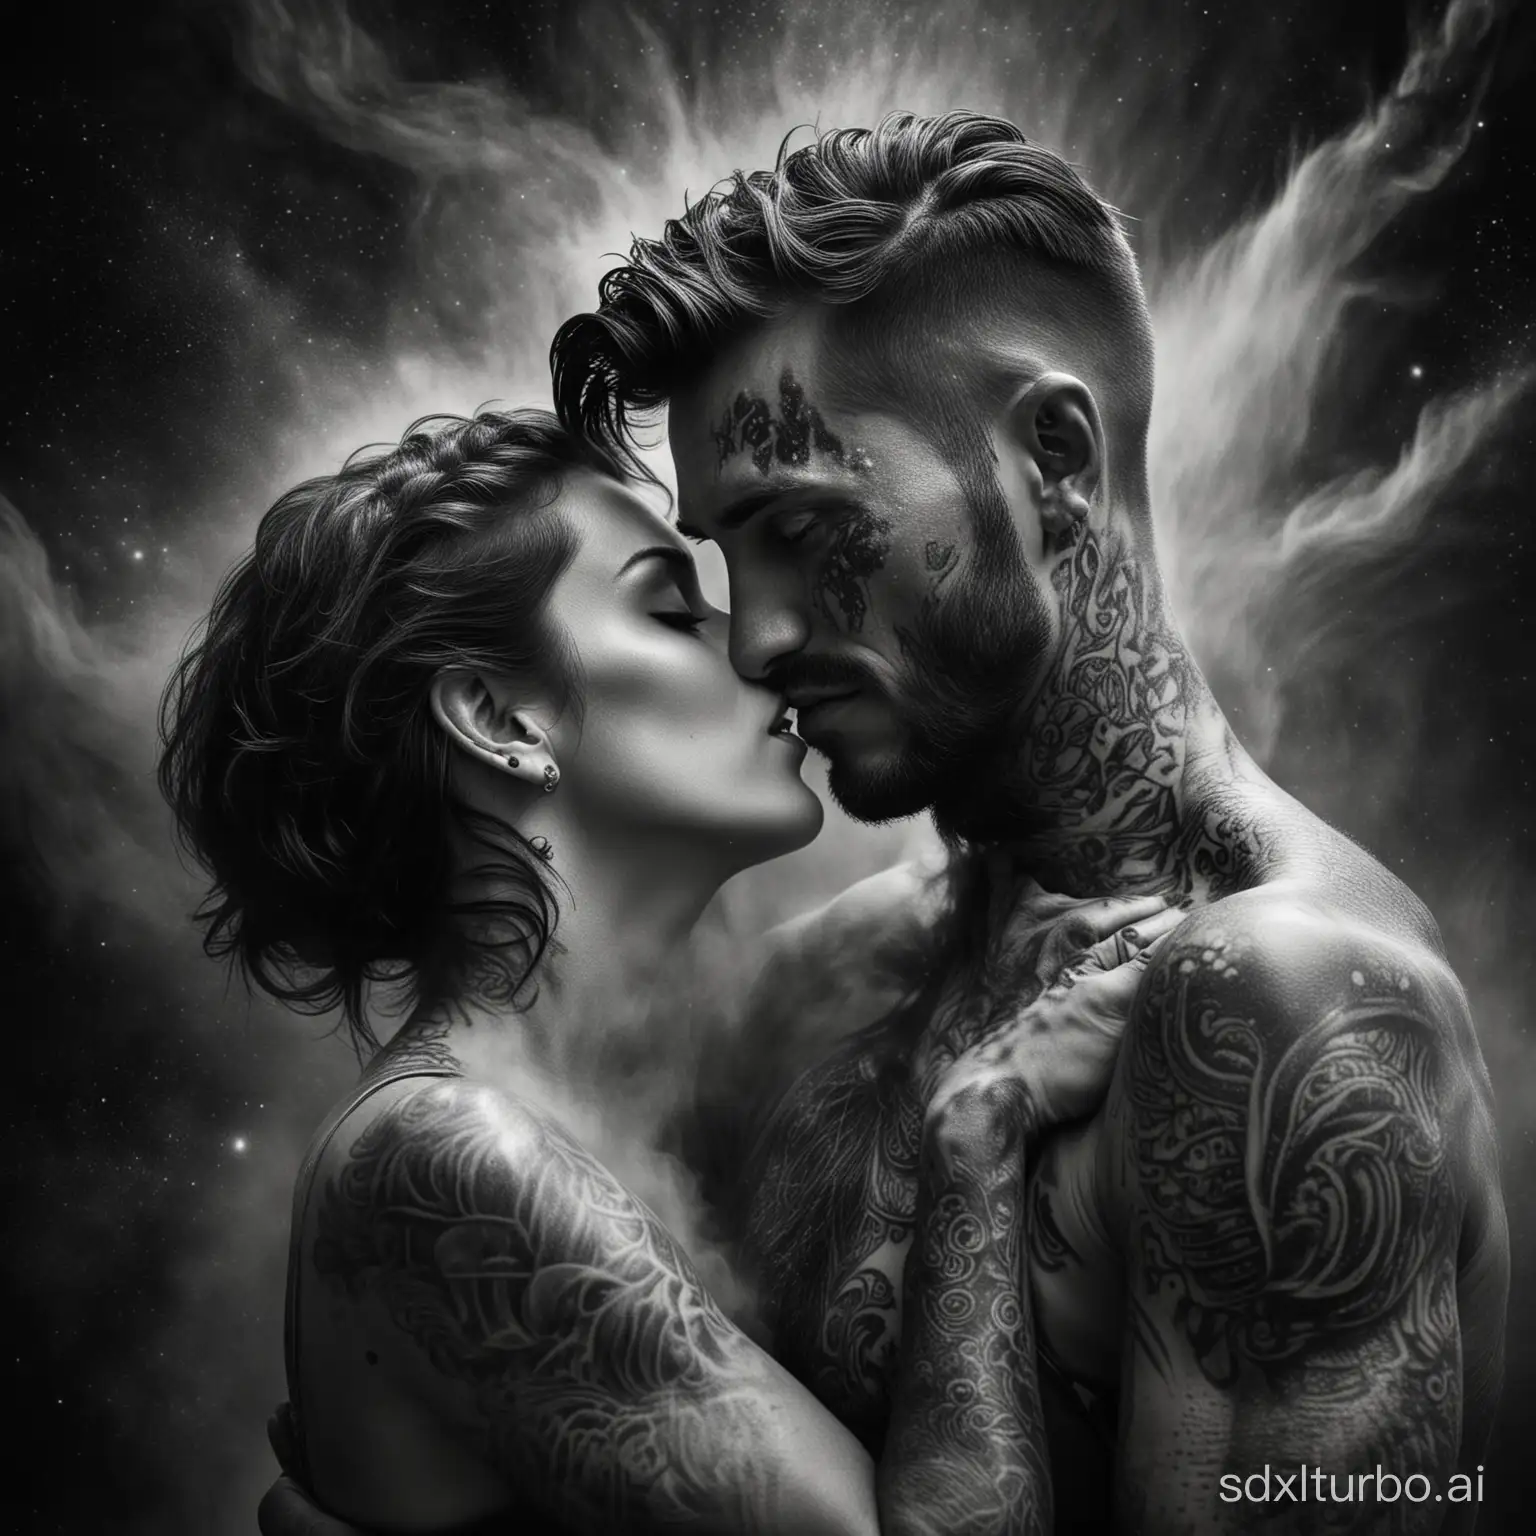 Dark art, black and white photograph, close-up of a tattooed man embracing his woman in a space dust storm, dark room. The image is in the style of a dark room photograph